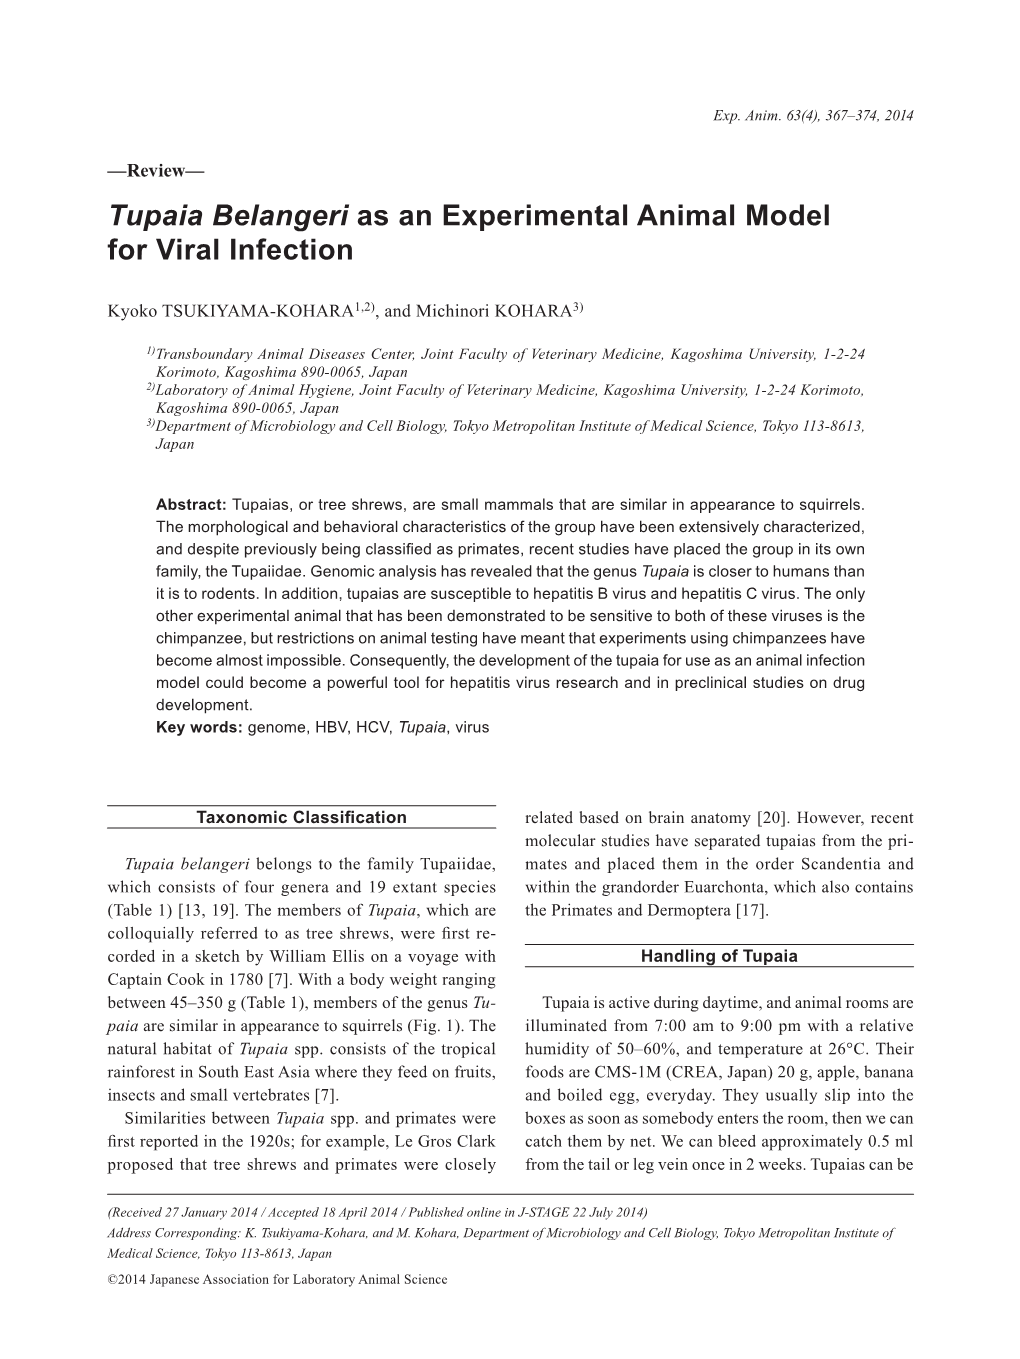 Tupaia Belangeri As an Experimental Animal Model for Viral Infection